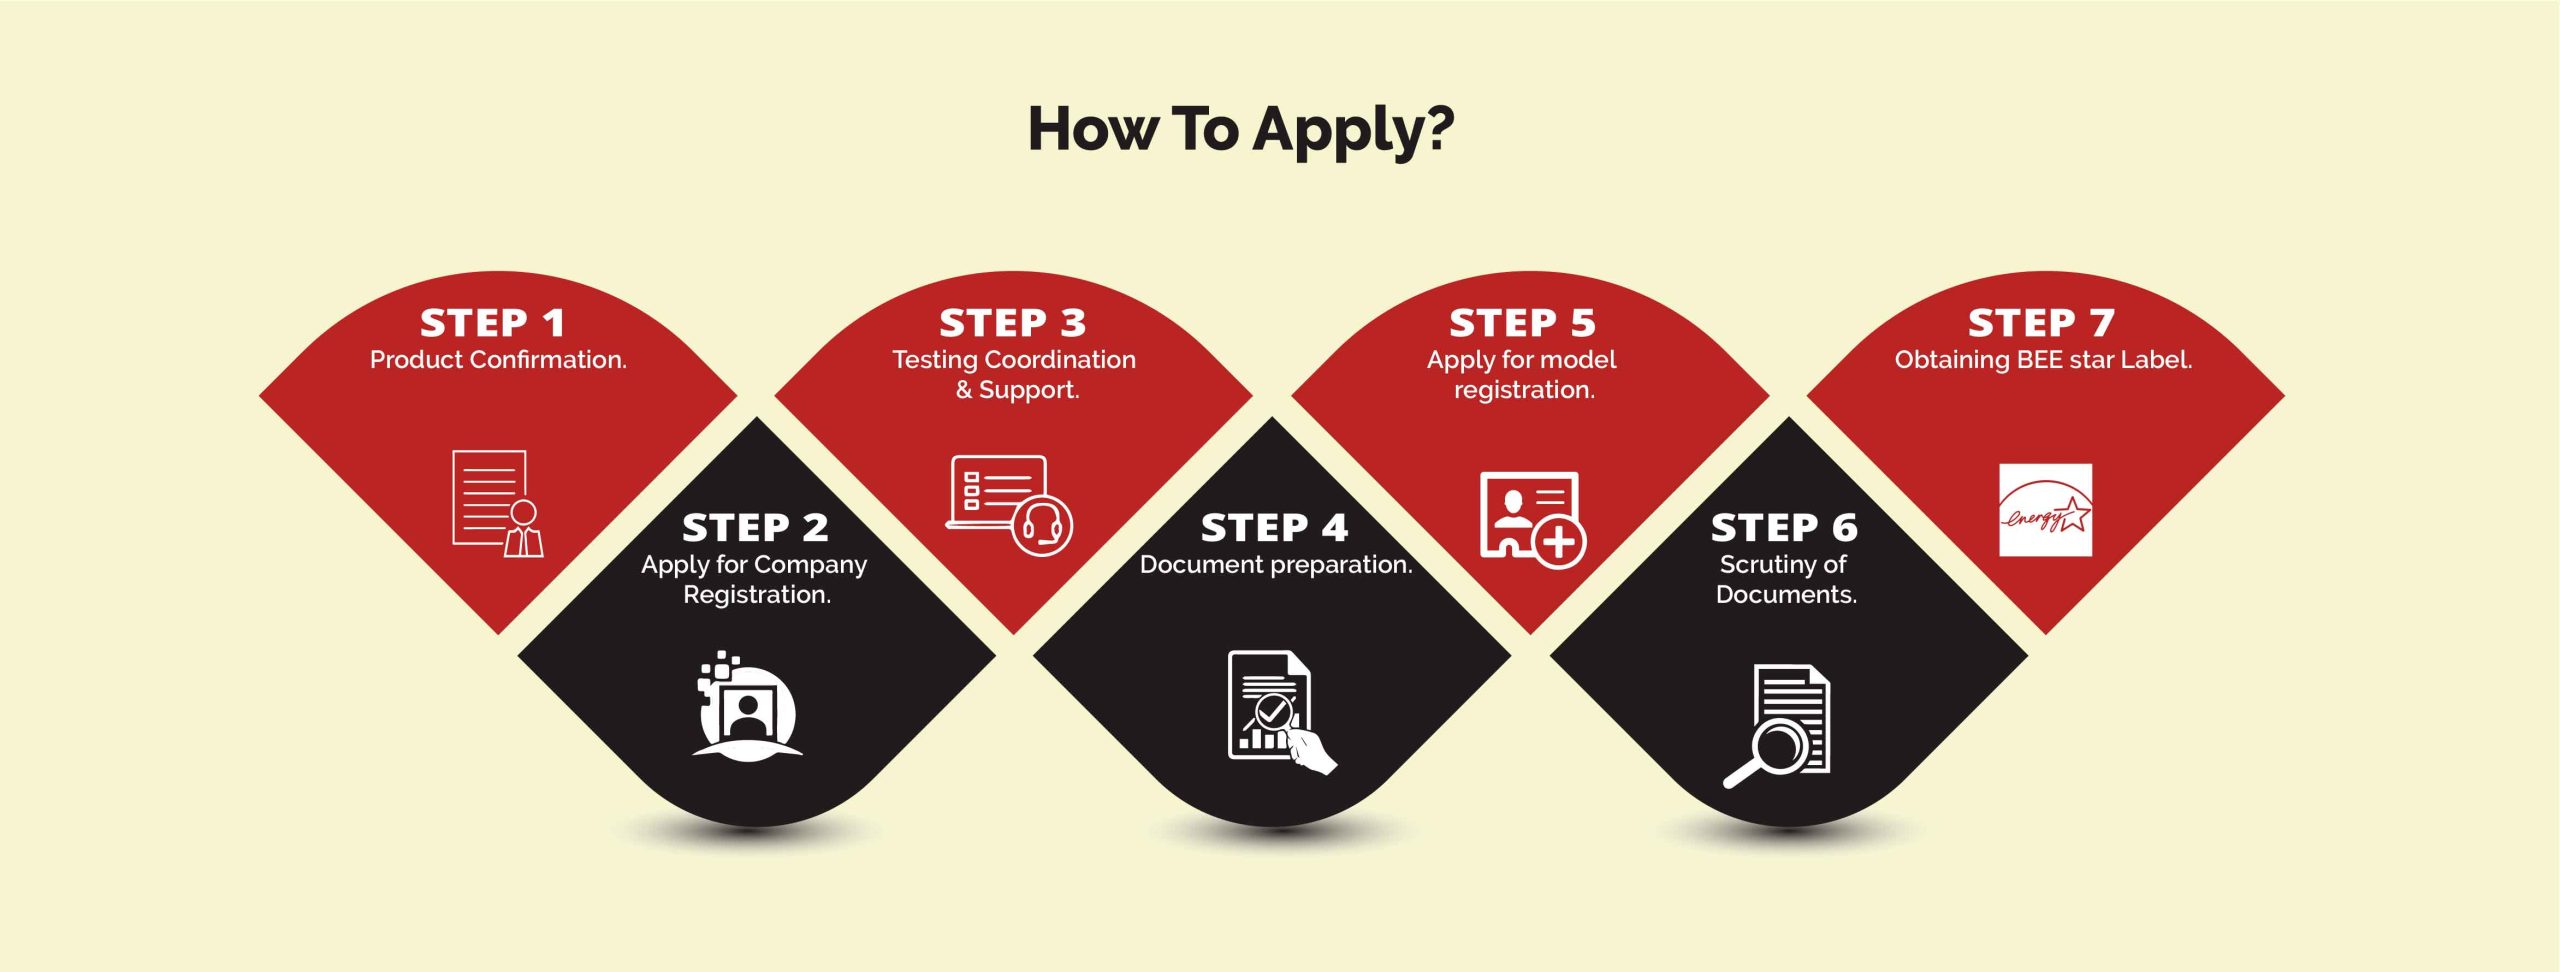 HOW TO APPLY?